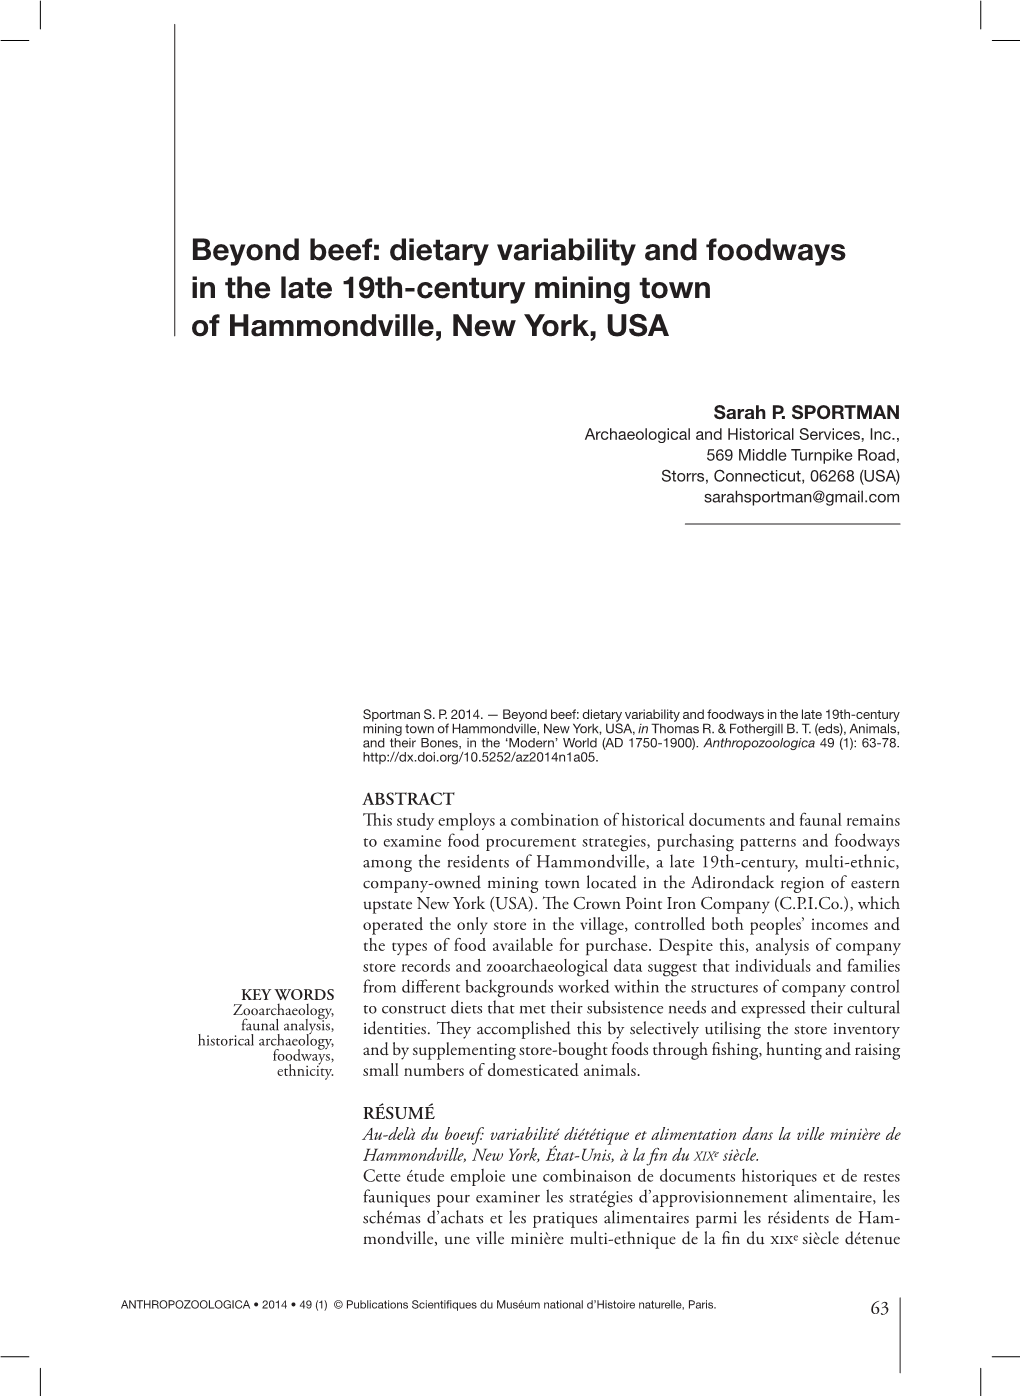 Beyond Beef: Dietary Variability and Foodways in the Late 19Th-Century Mining Town of Hammondville, New York, USA